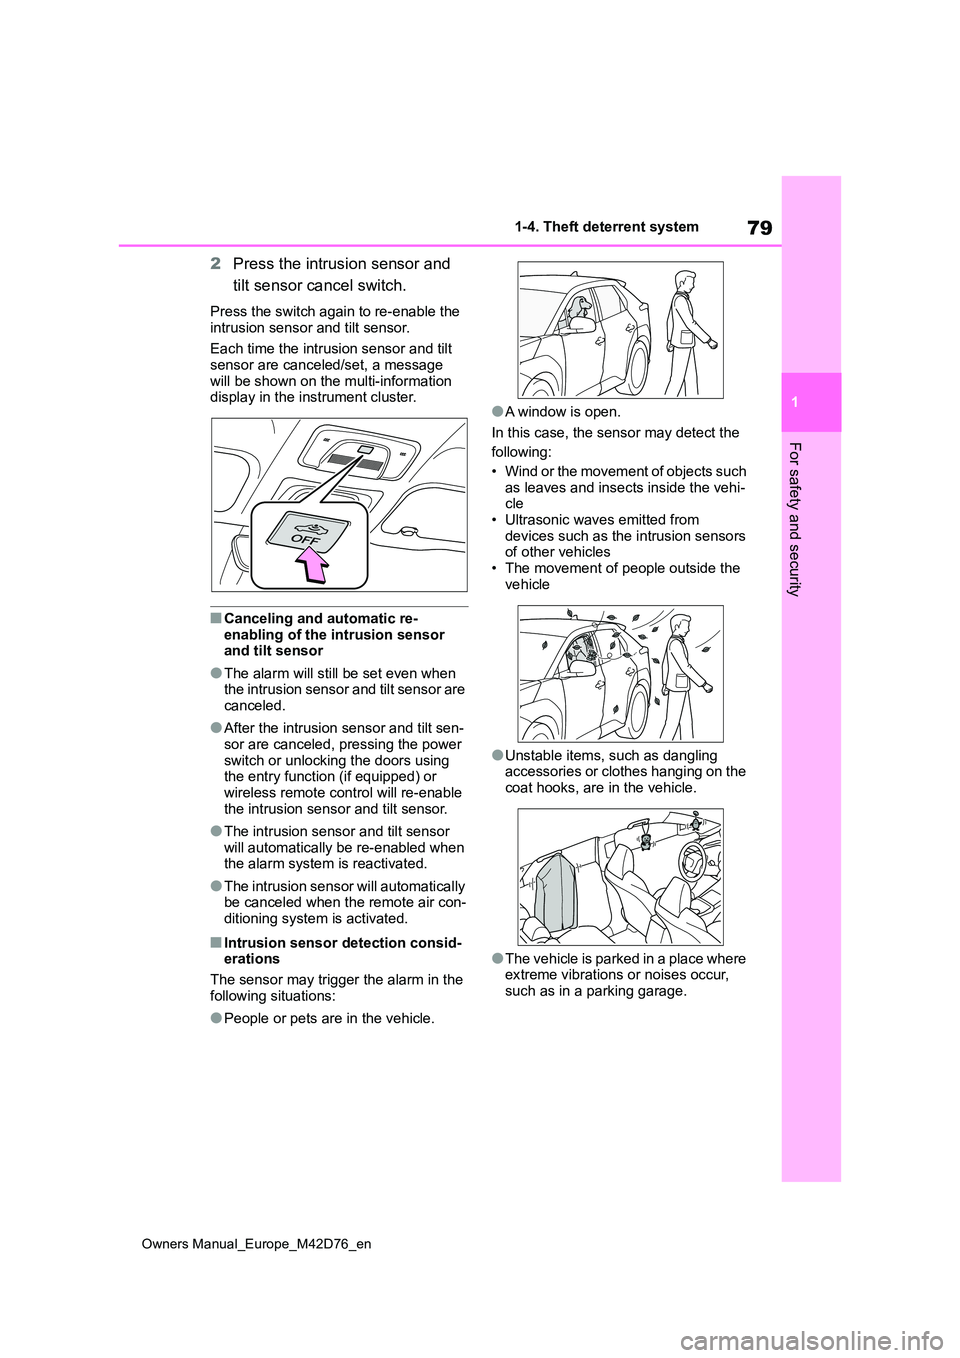 TOYOTA BZ4X 2022  Owners Manual (in English) 79
1
Owners Manual_Europe_M42D76_en
1-4. Theft deterrent system
For safety and security
2Press the intrusion sensor and  
tilt sensor cancel switch.
Press the switch again to re-enable the  
intrusion